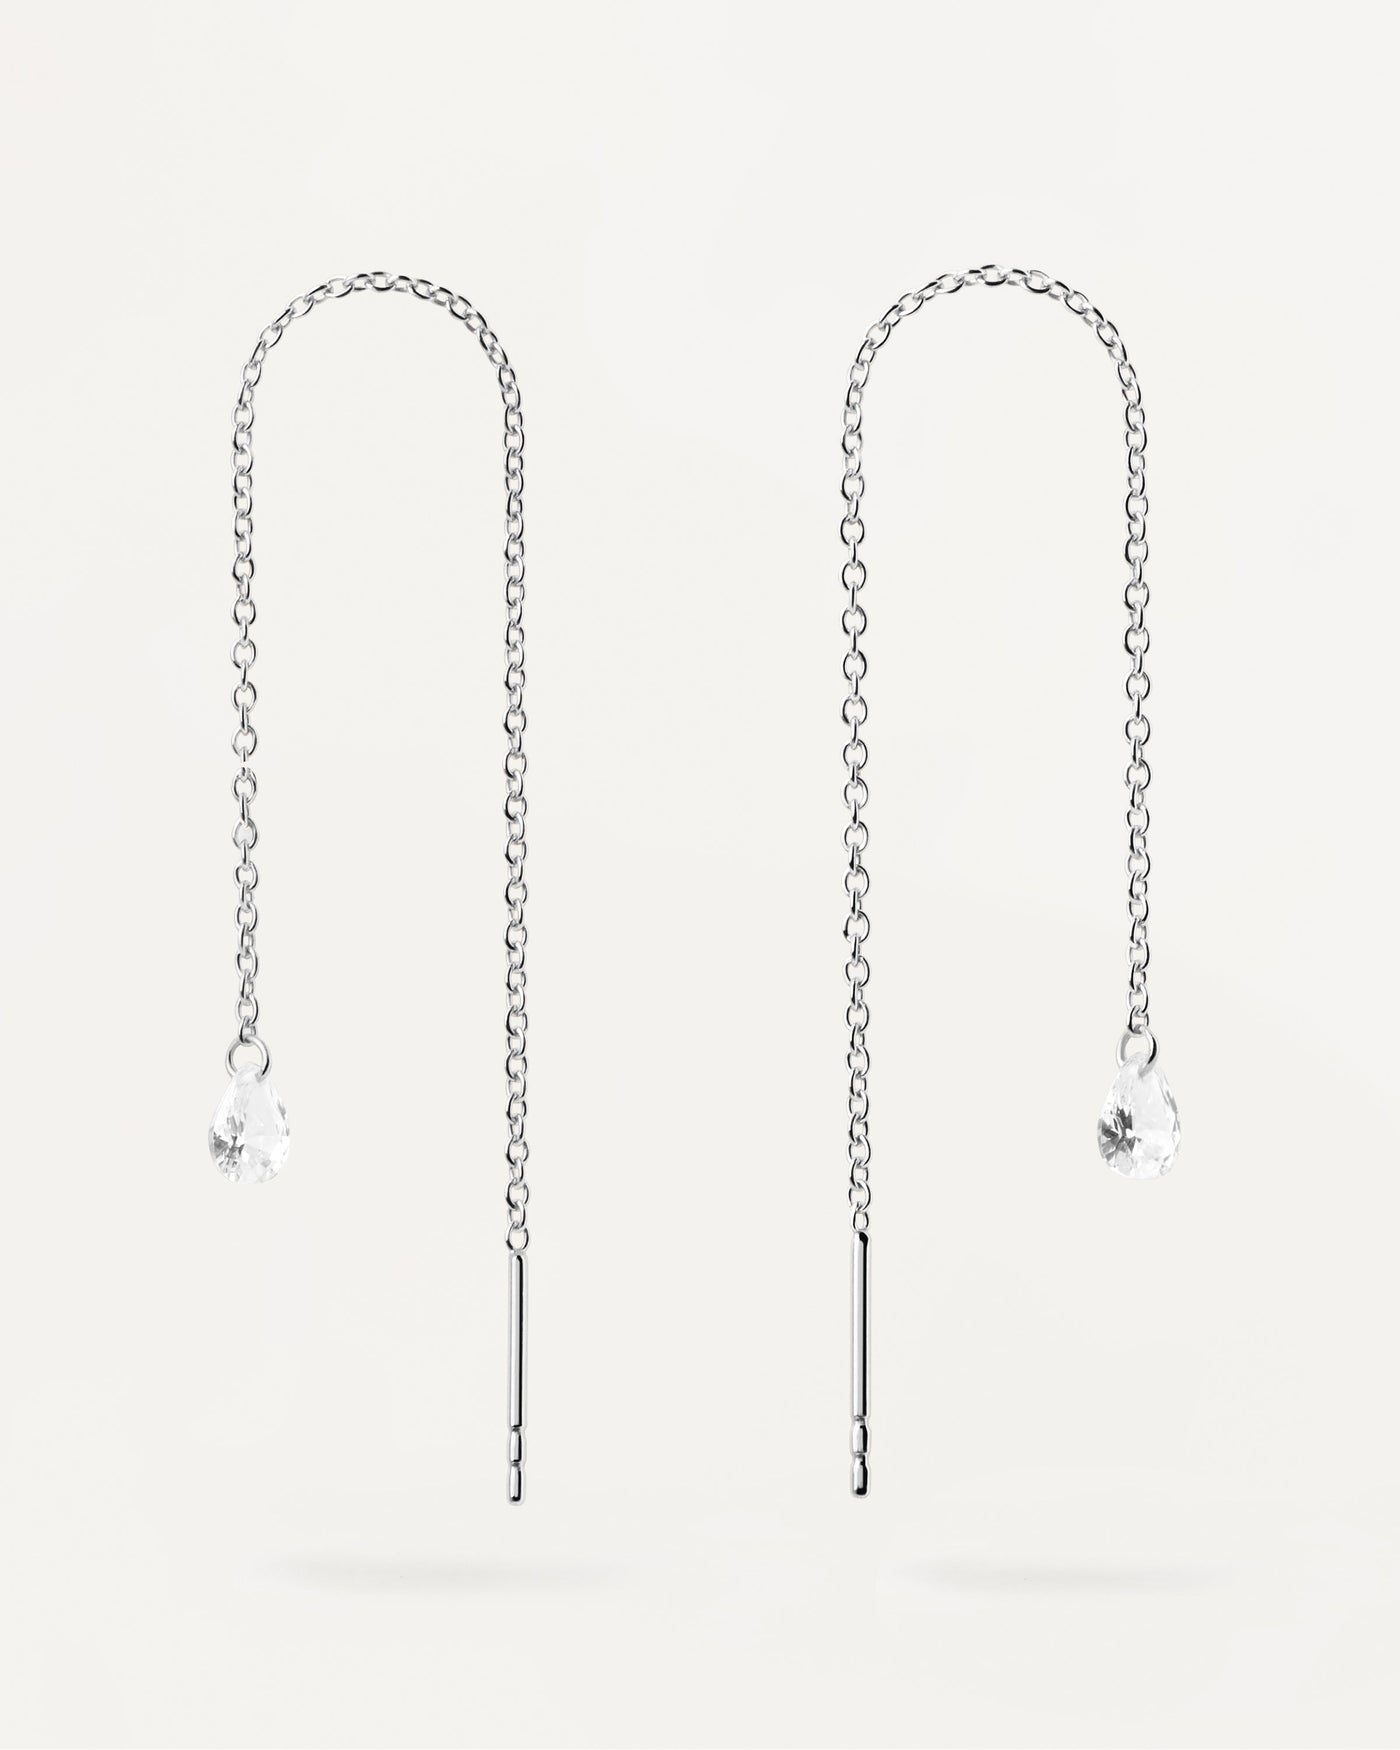 2023 Selection | Waterfall drop silver Earrings. Long delicate earrings in sterling silver with drop zirconia pendant. Get the latest arrival from PDPAOLA. Place your order safely and get this Best Seller. Free Shipping.